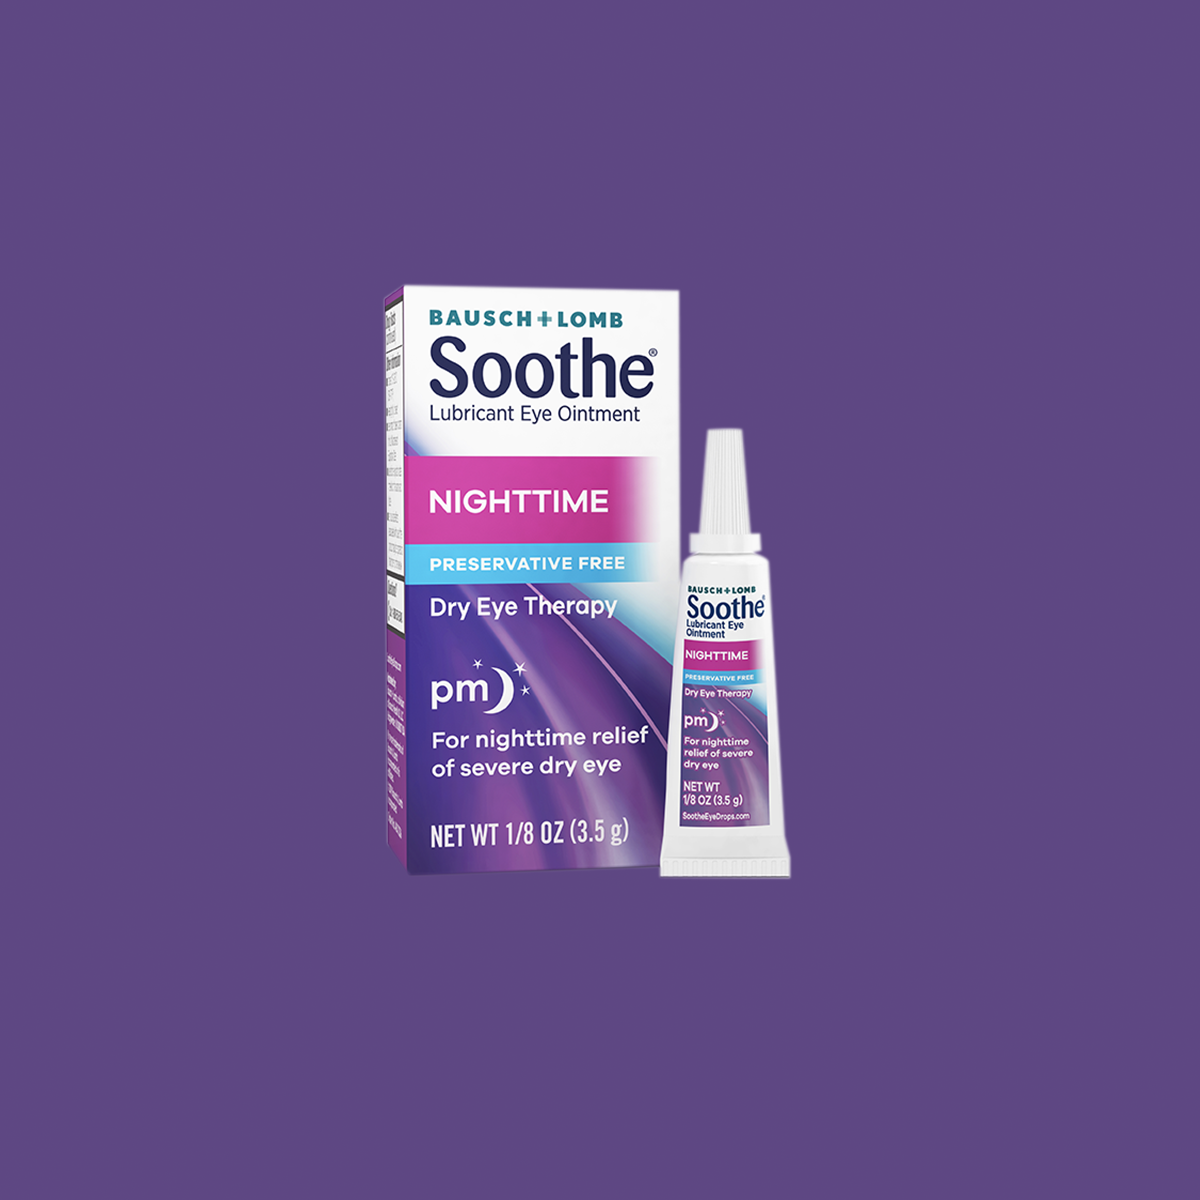 Bausch & Lomb Soothe XP Lubricant Eye Drops, Xtra Protection Formula